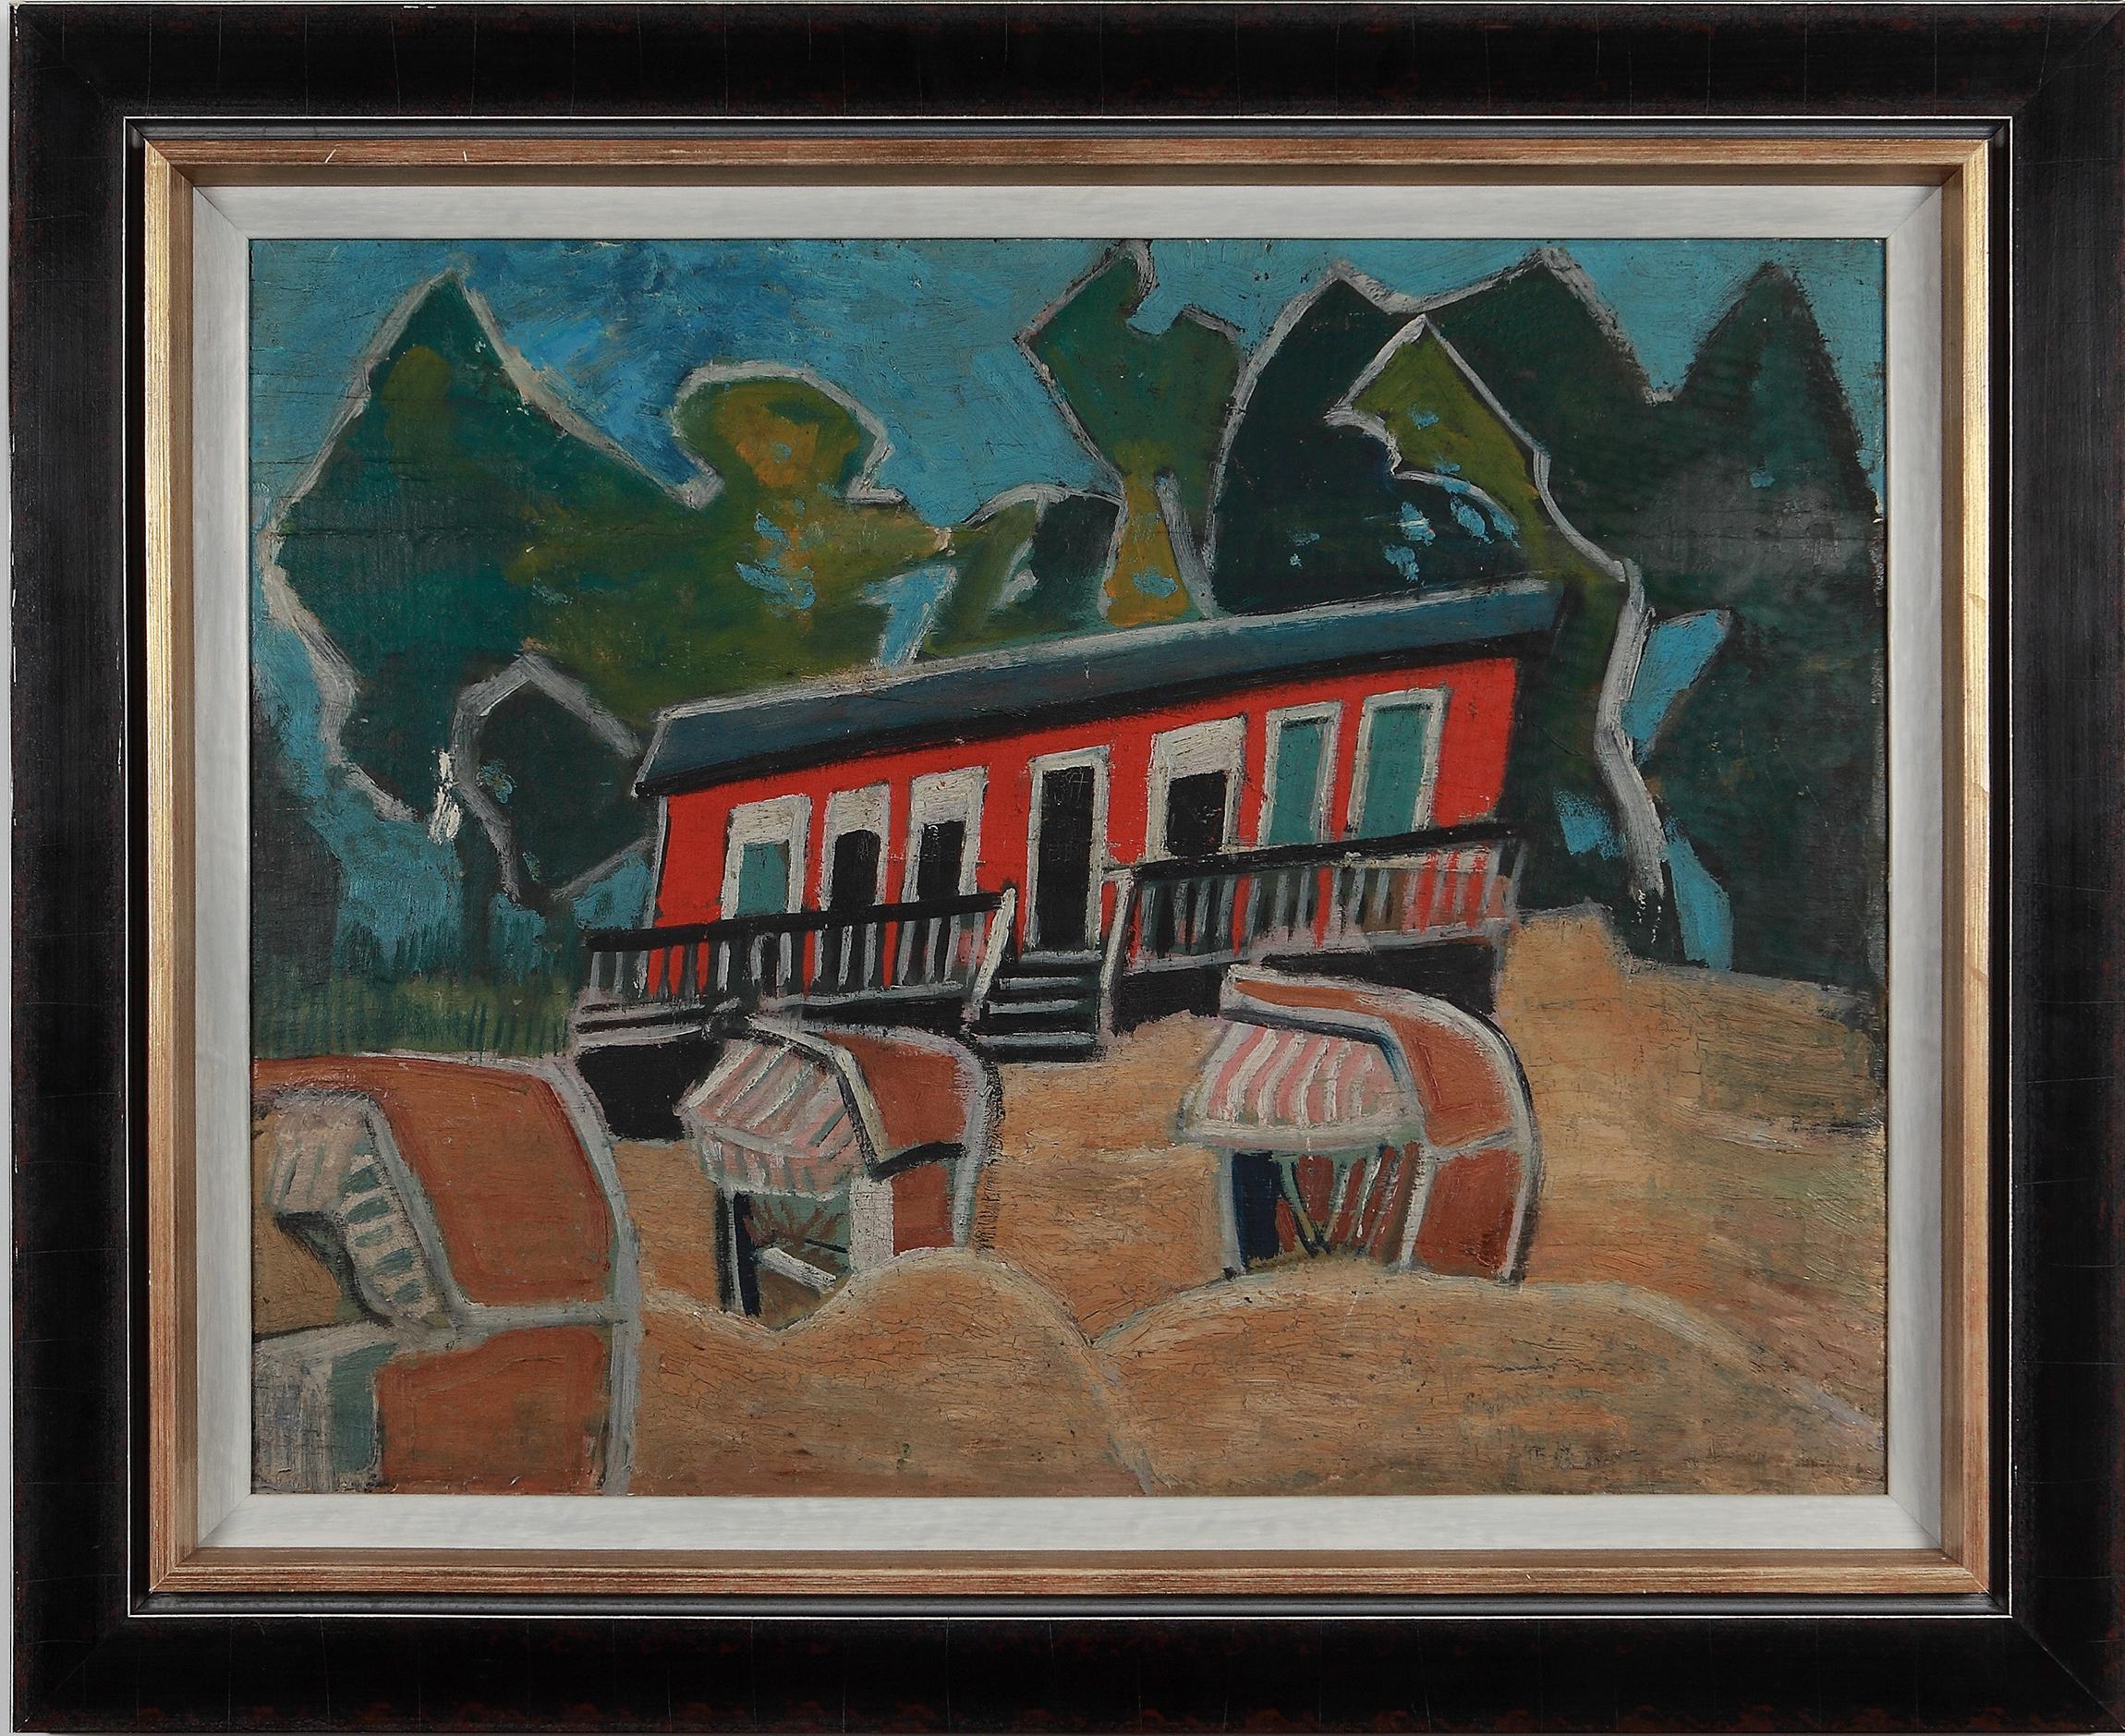 Oil on wood, about 1928 by Friedrich Karl Gotsch ( 1900-1984 ), Germany. Verso inscribed. Framed. 
Dimensions: Height: 18,82 in ( 47,8 cm ), Width: 24,96 in ( 63,4 cm )